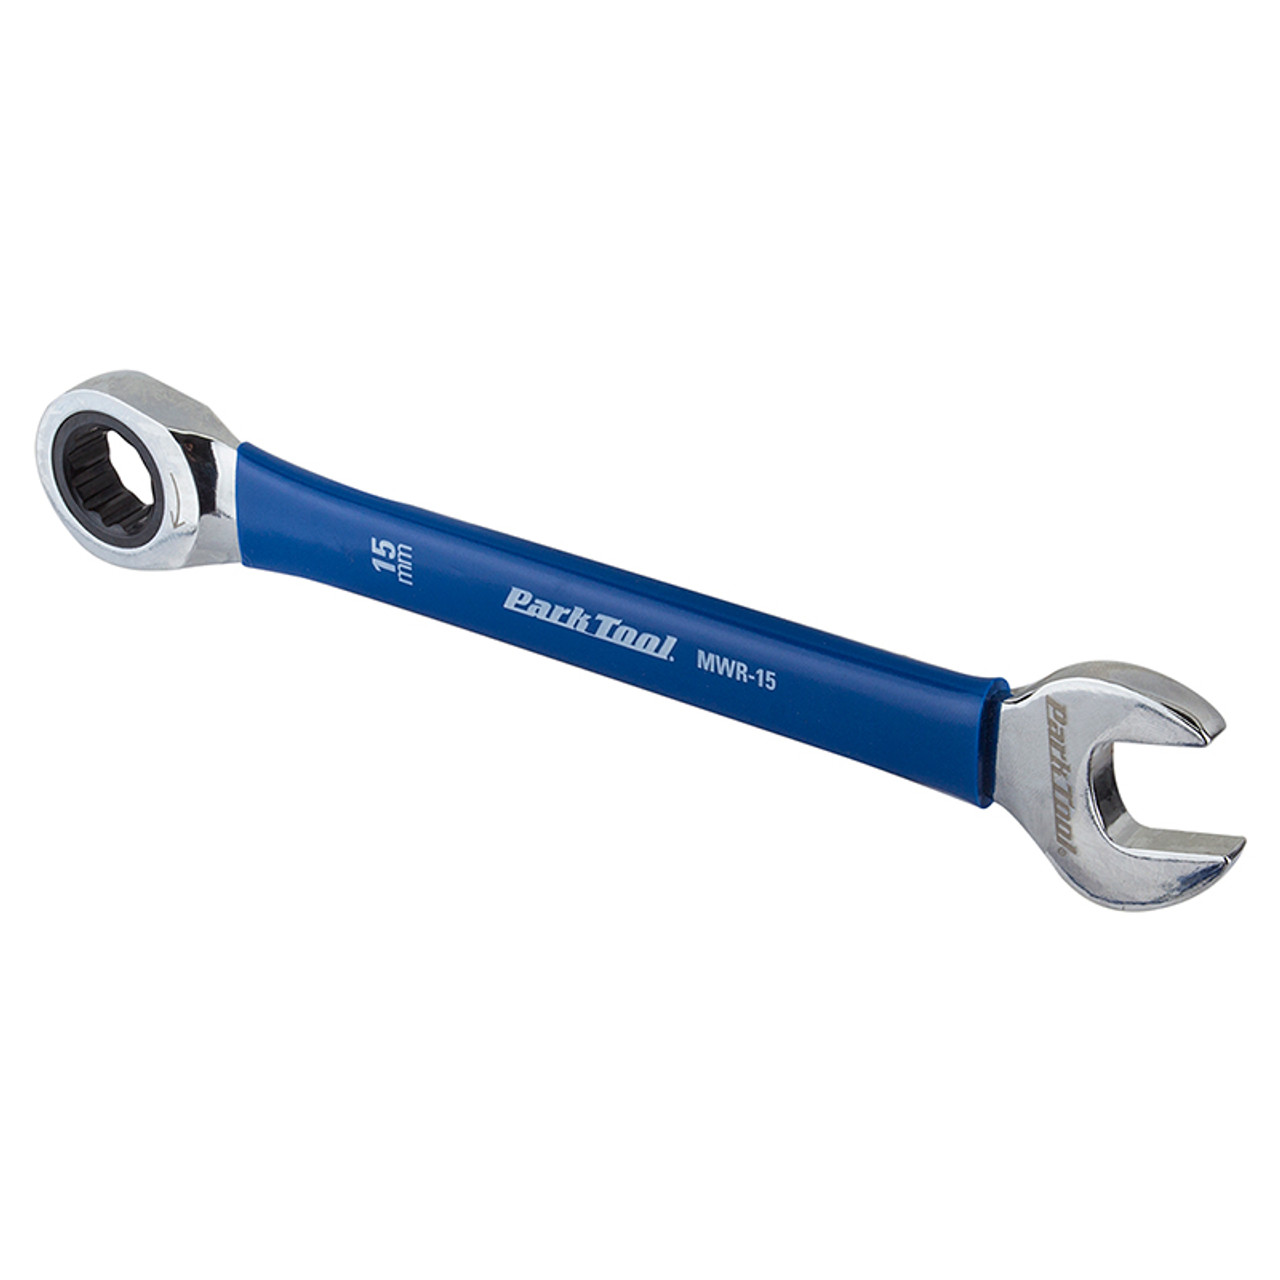 PARK TOOL MWR-15 15mm RATCHETING WRENCH BICYCLE TOOL 